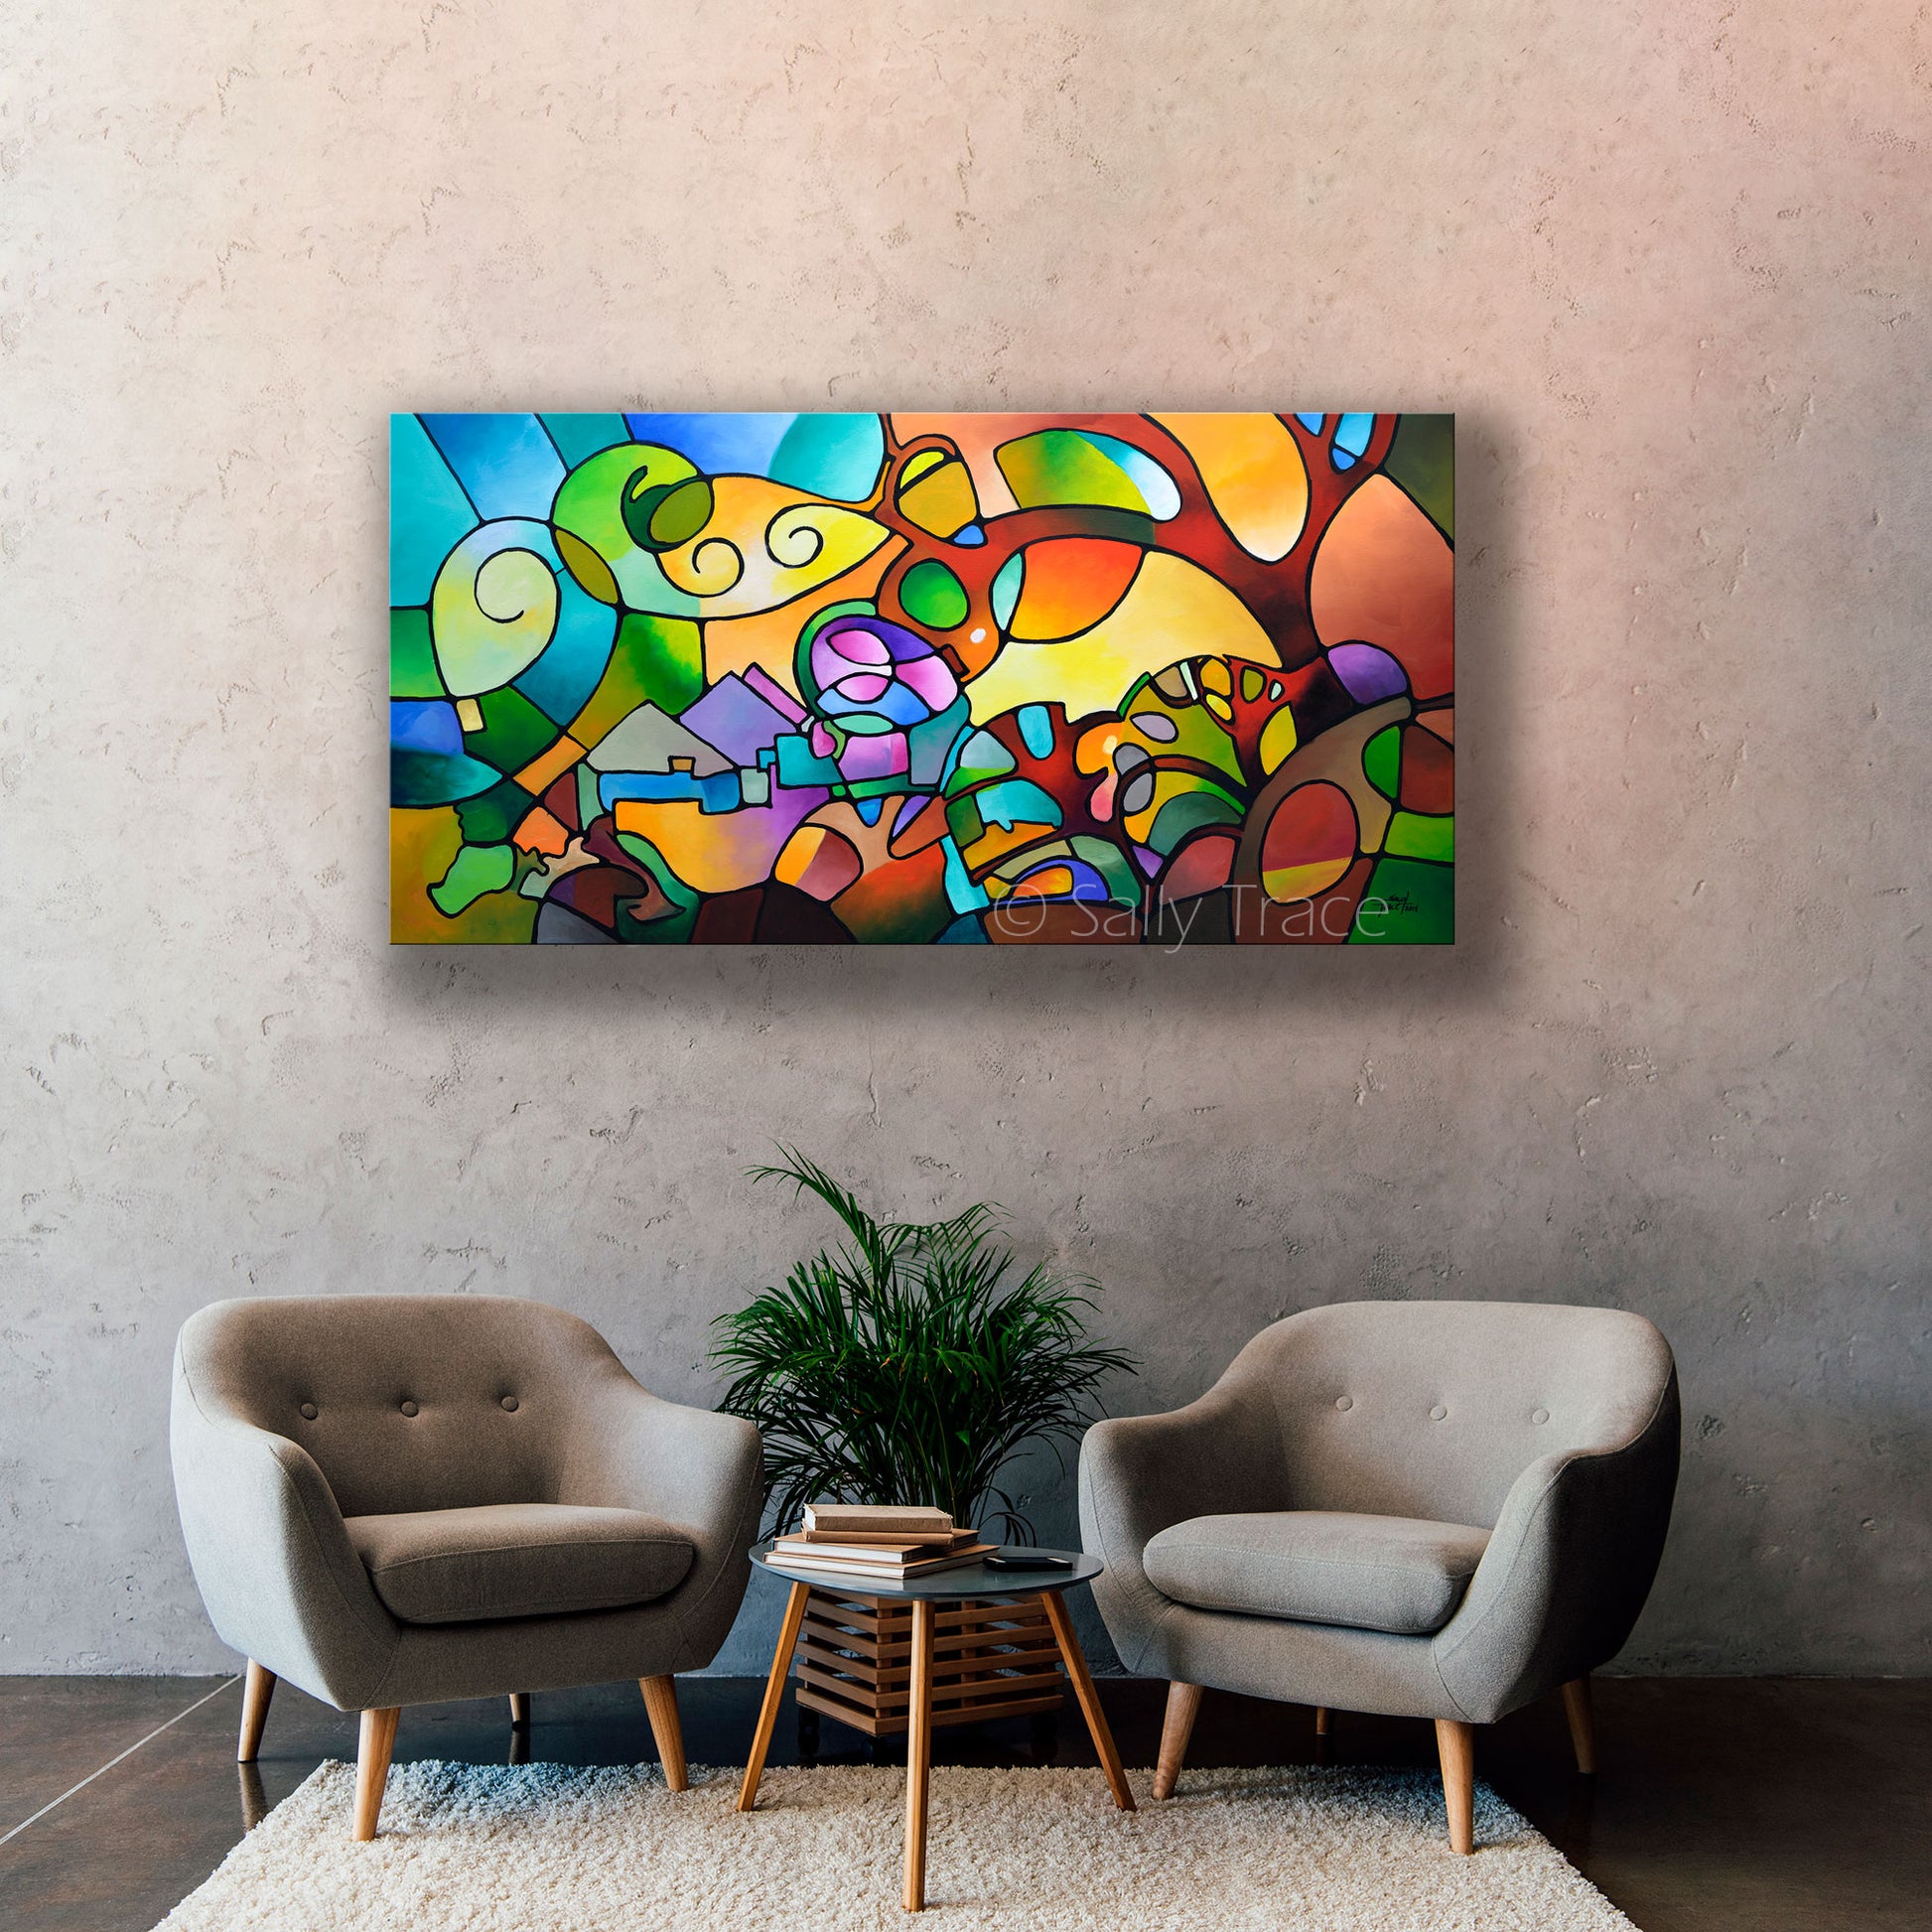 Original abstract landscape painting by Sally Trace that is about a feeling of expansiveness when one is stepping out into a new day. This is an acrylic on canvas painting in a vertical format and is 24 inches high and 48 inches wide.  This image shows the painting in a sitting room setting.